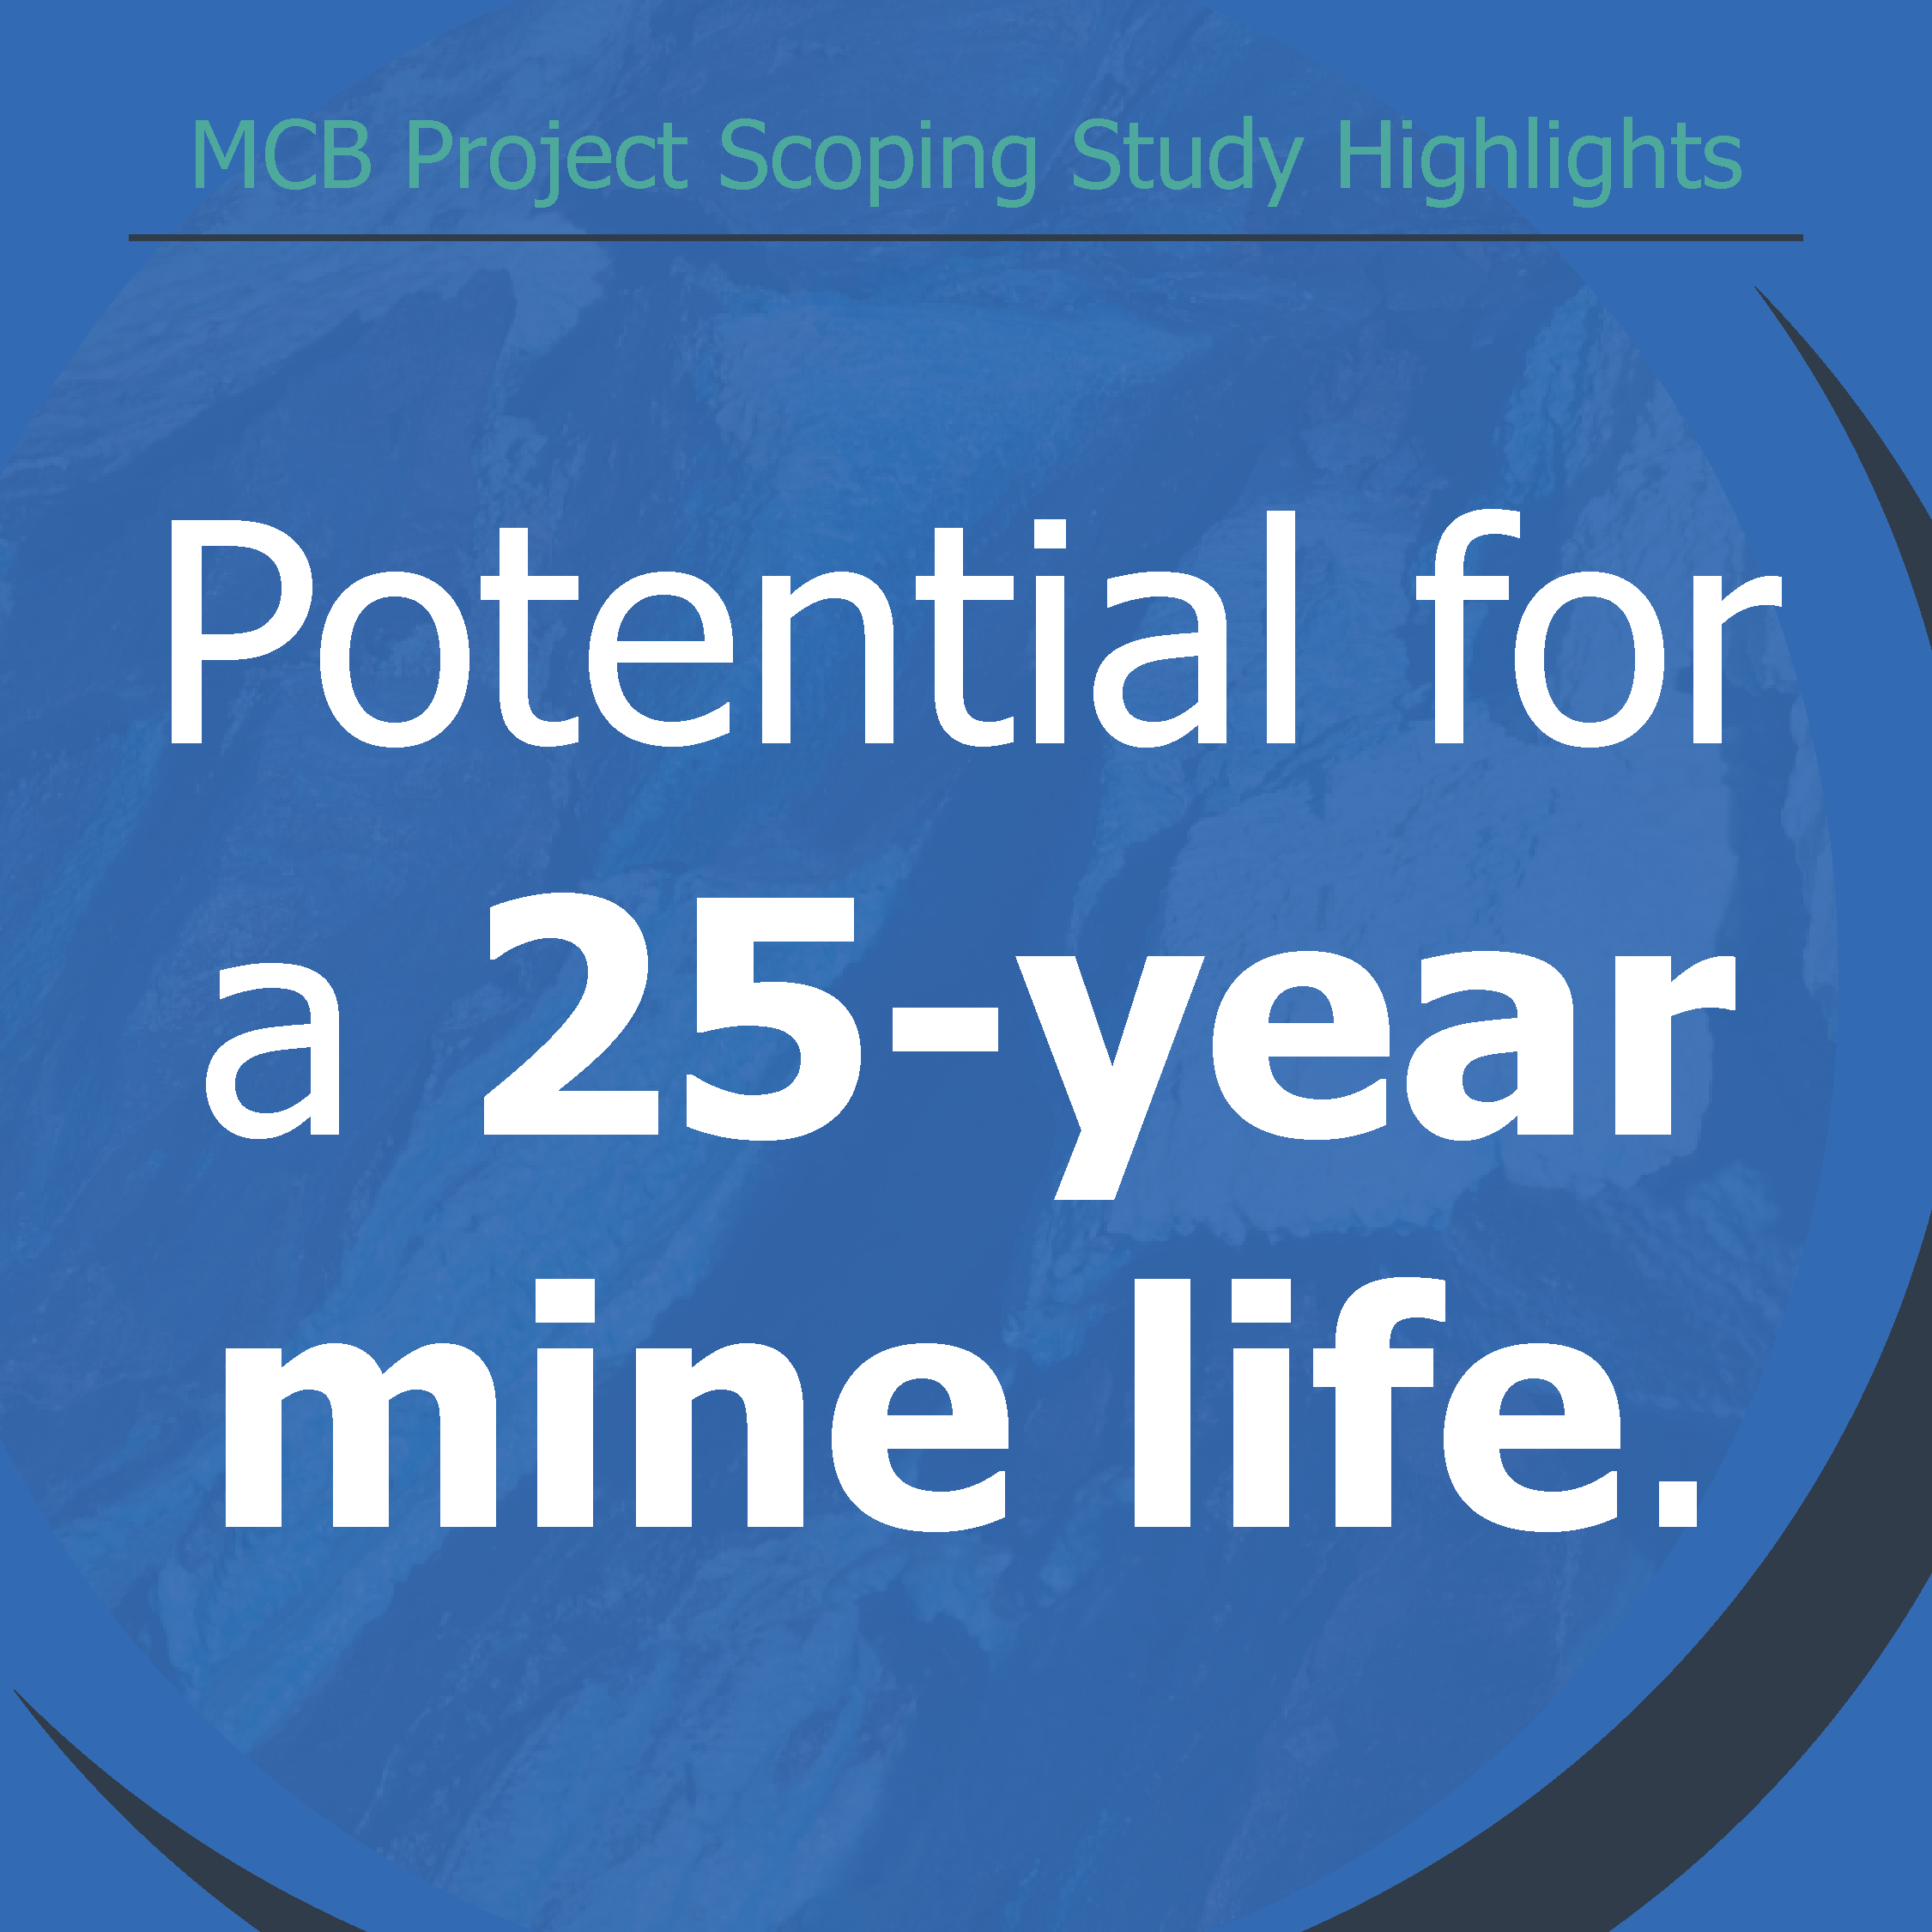 Scoping Study confirms robust, low-cost, longlife MCB project